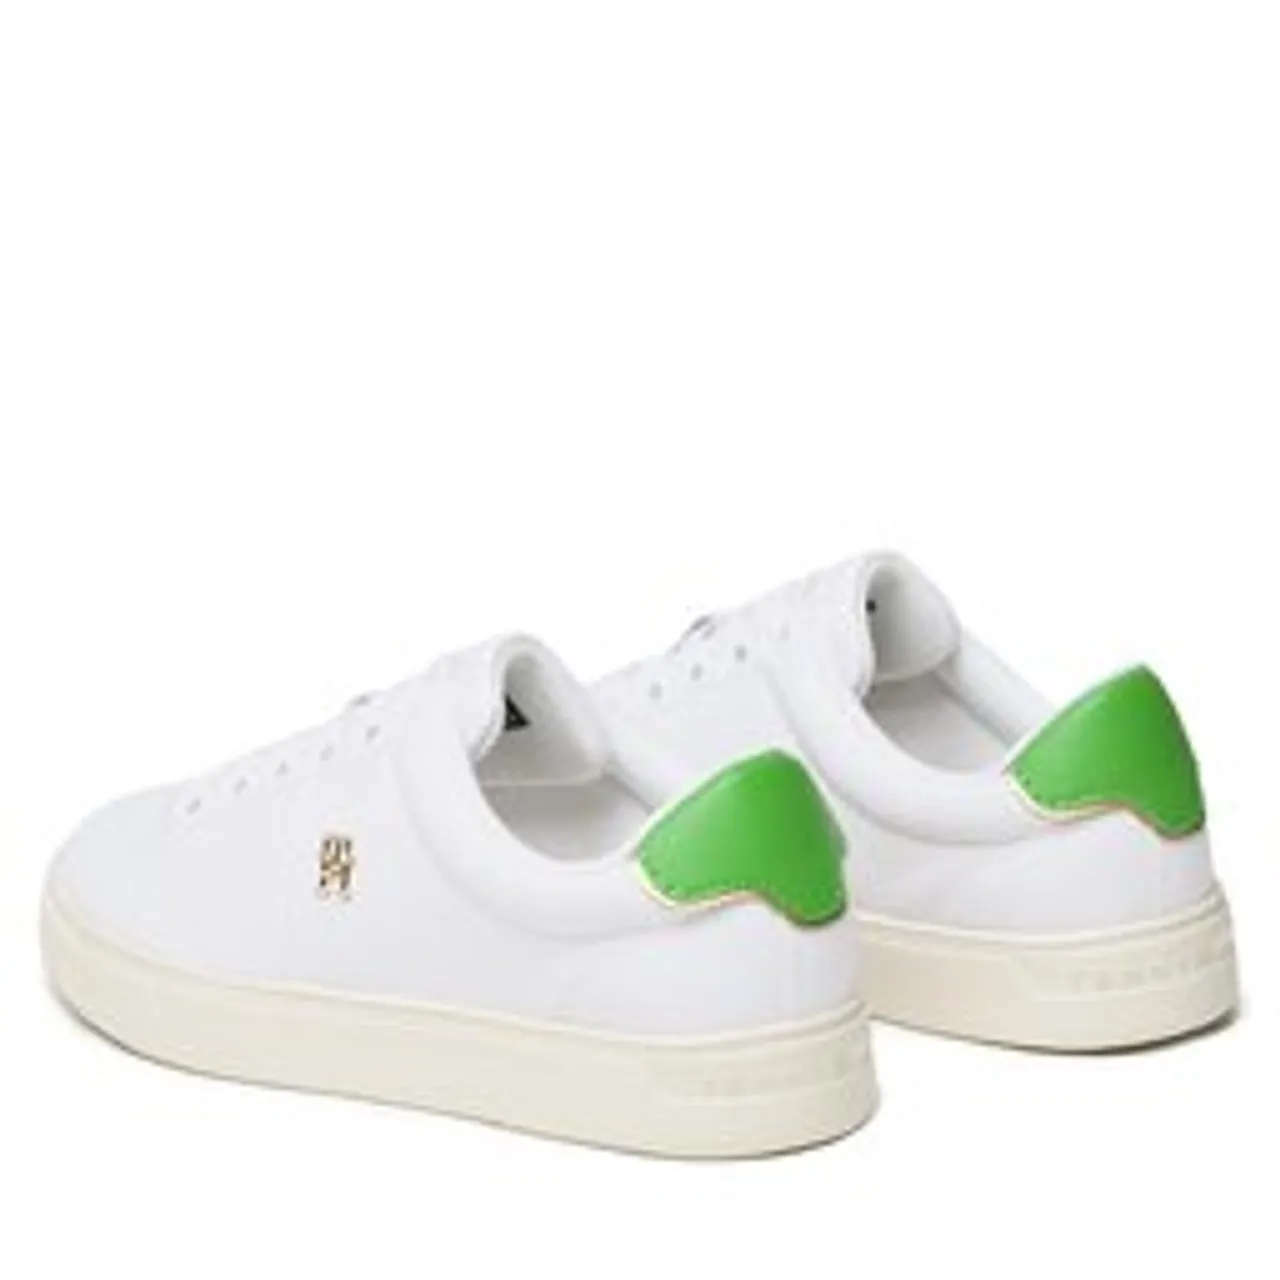 Sneakers Tommy Hilfiger Elevated Essential Court Sneaker FW0FW06965 White/Galvanicgreen